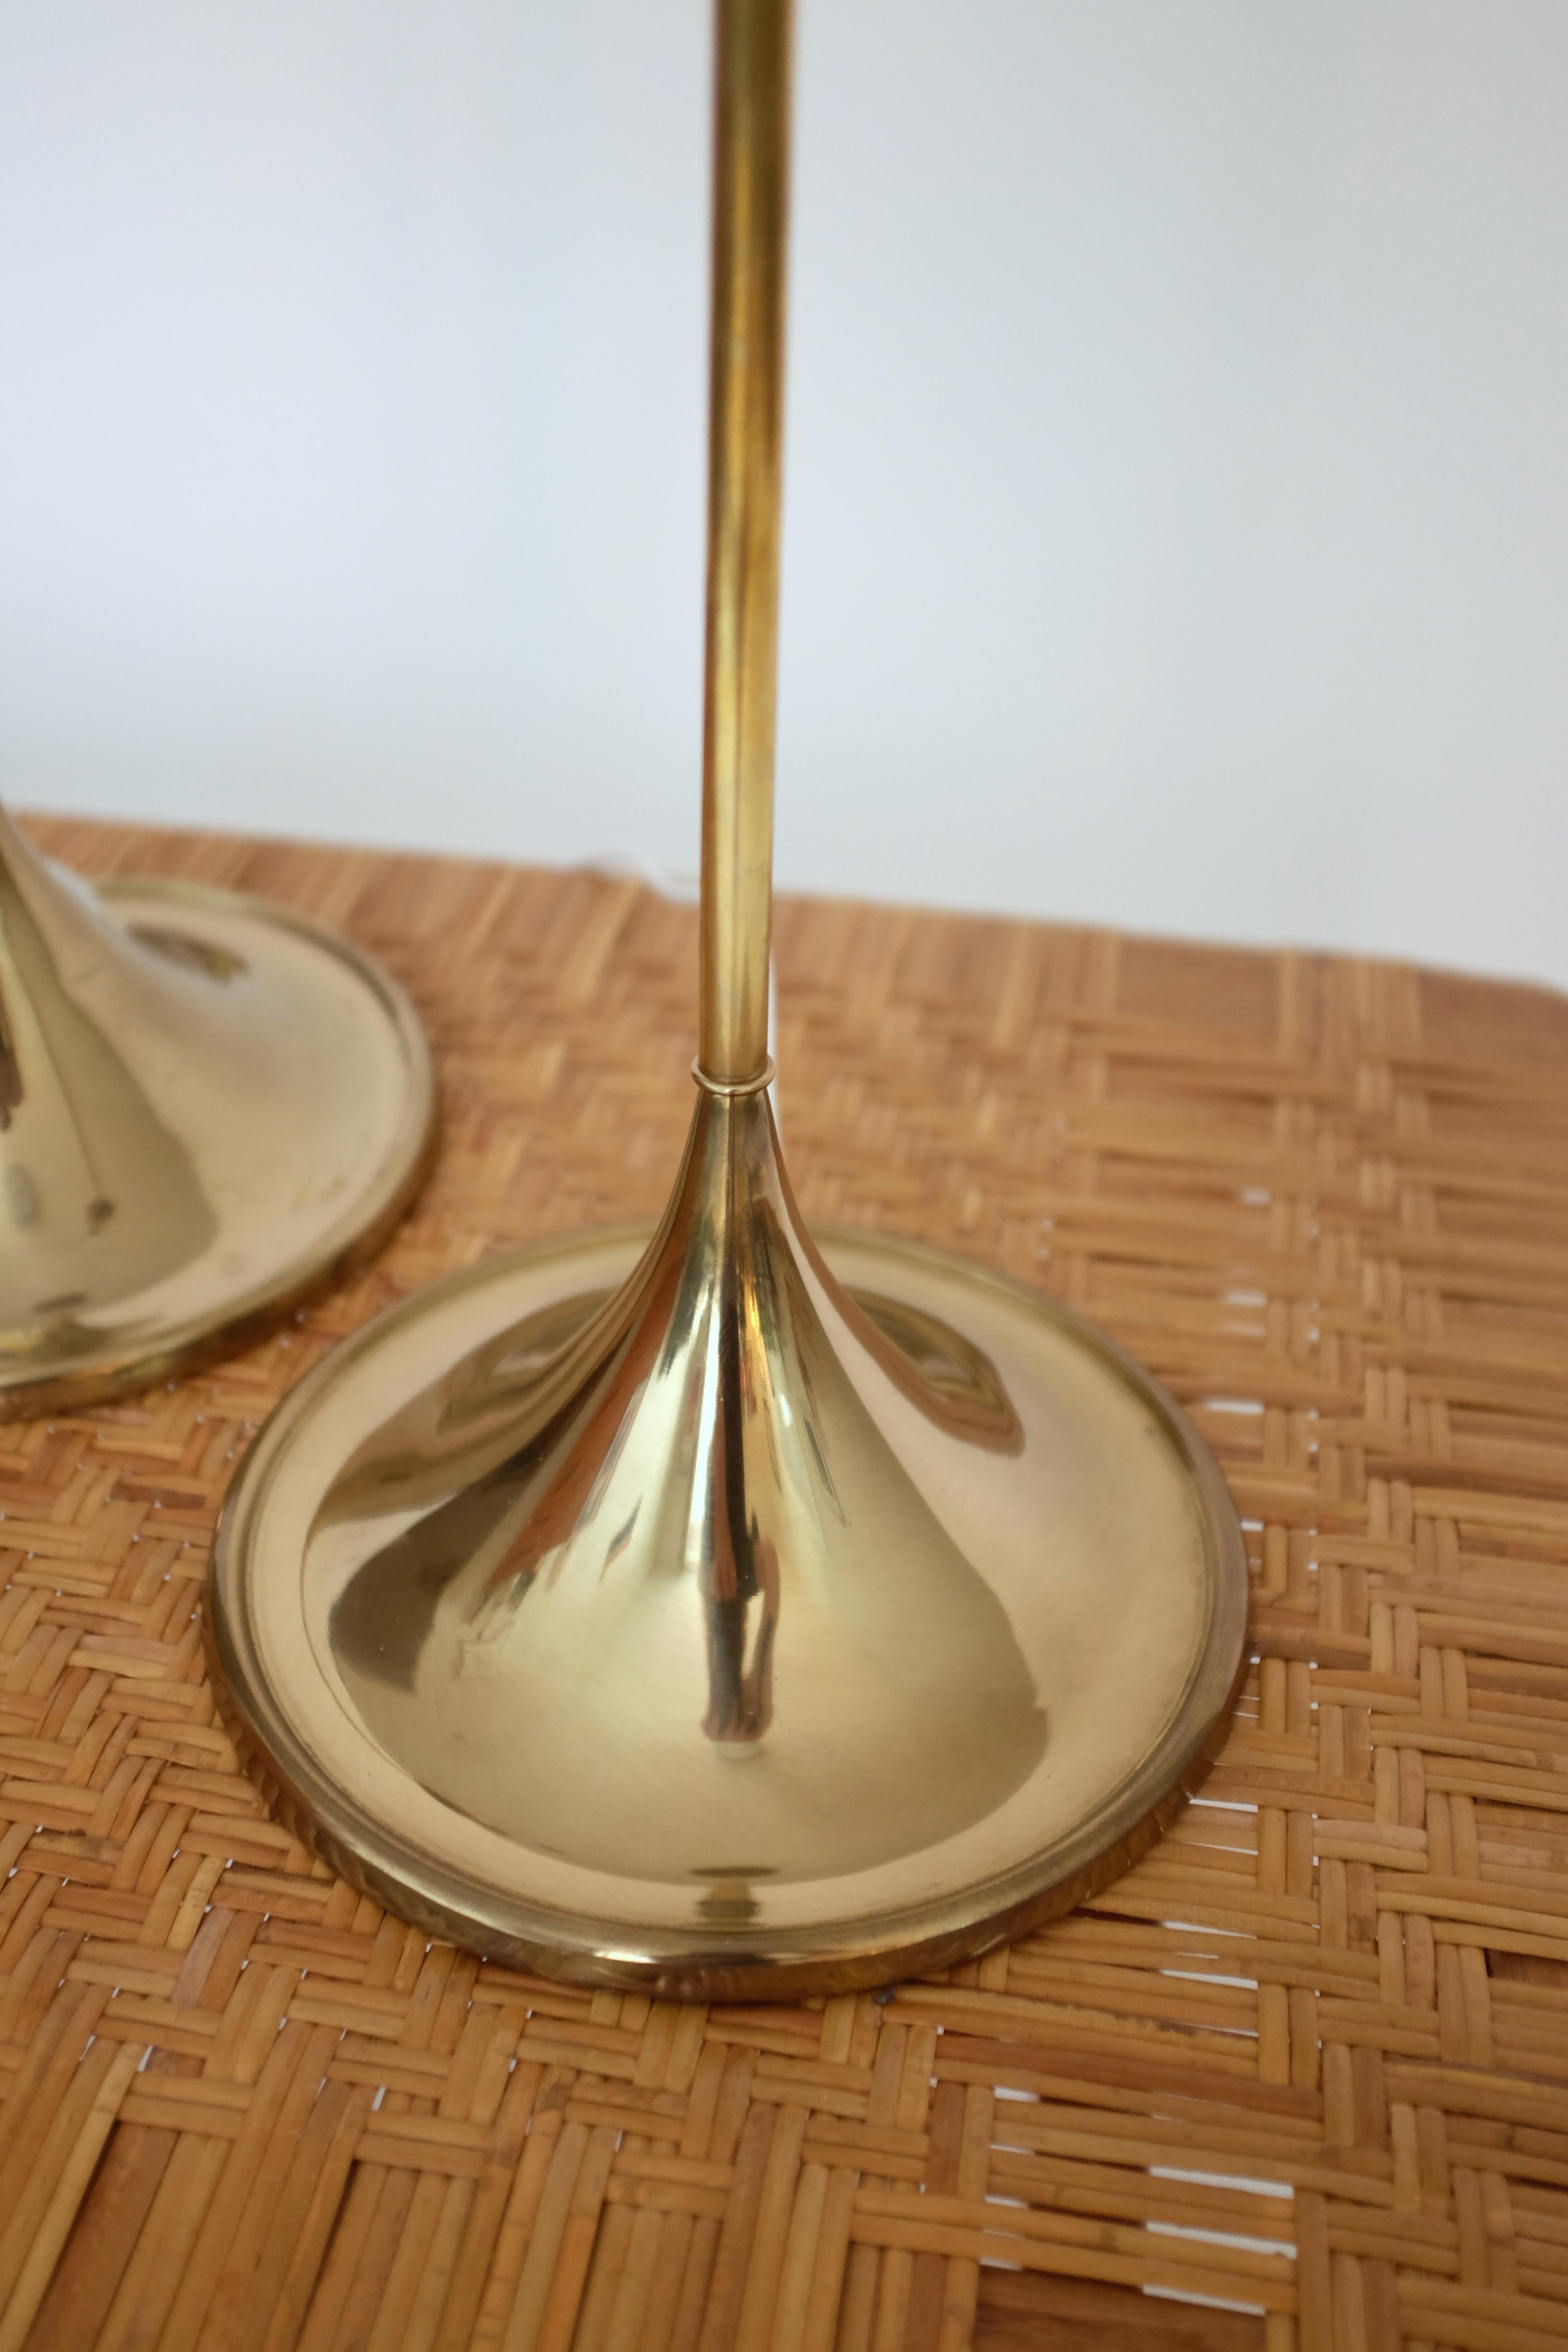 Beautiful pair of Bergboms brass lamp designed by Alf Svensson and Yngvar Sandström from the 1960's. Polished brass stem and cast iron base with the makers mark and model number. In good vintage condition with age appropriate wear to the brass lamp